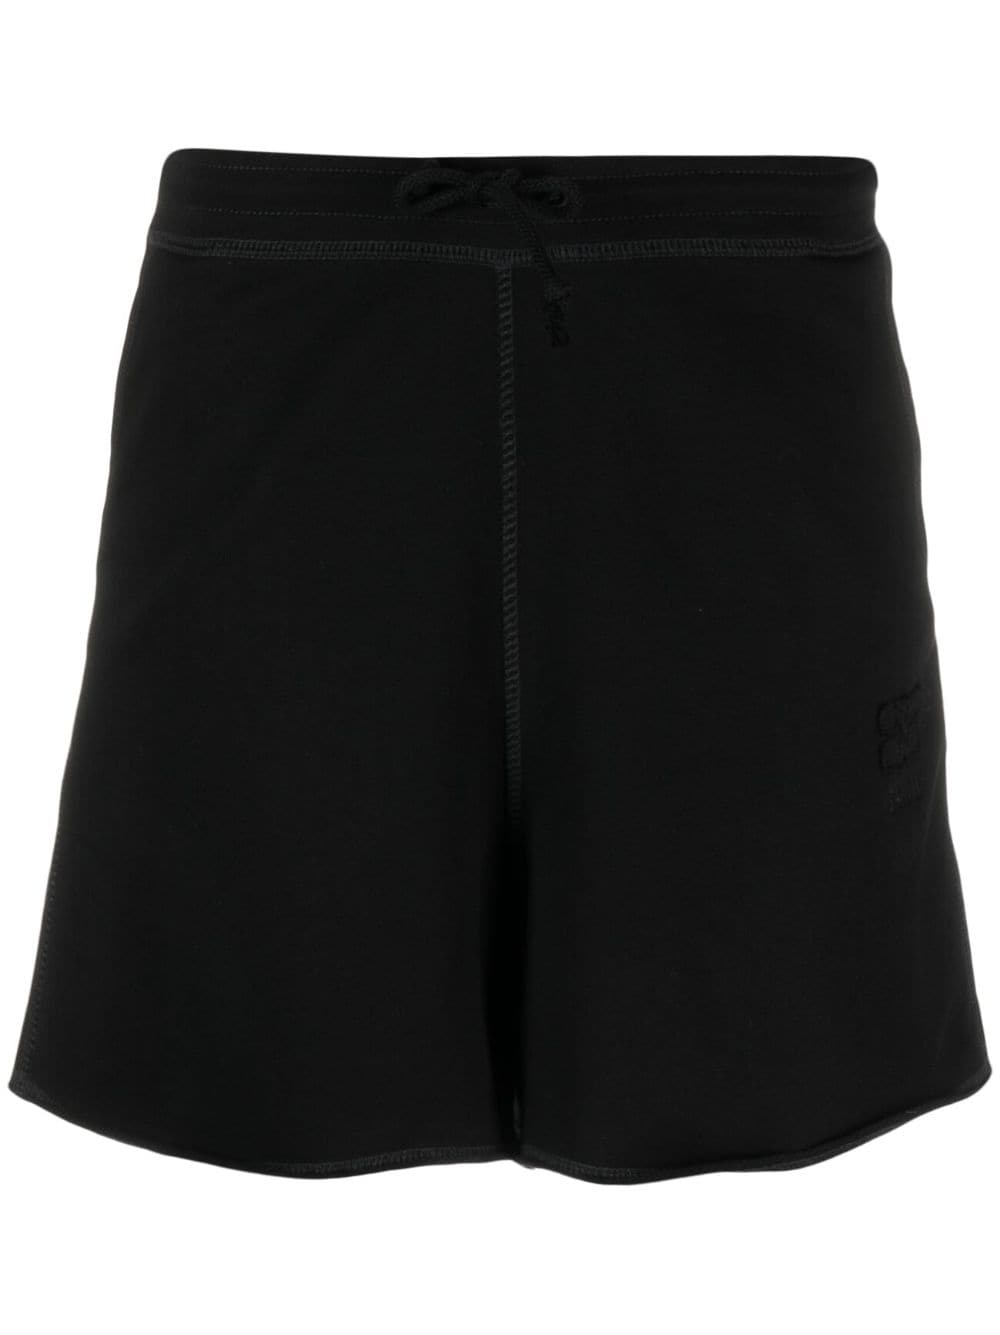 Shorts con coulisse in nero - donna GANNI | T3565099